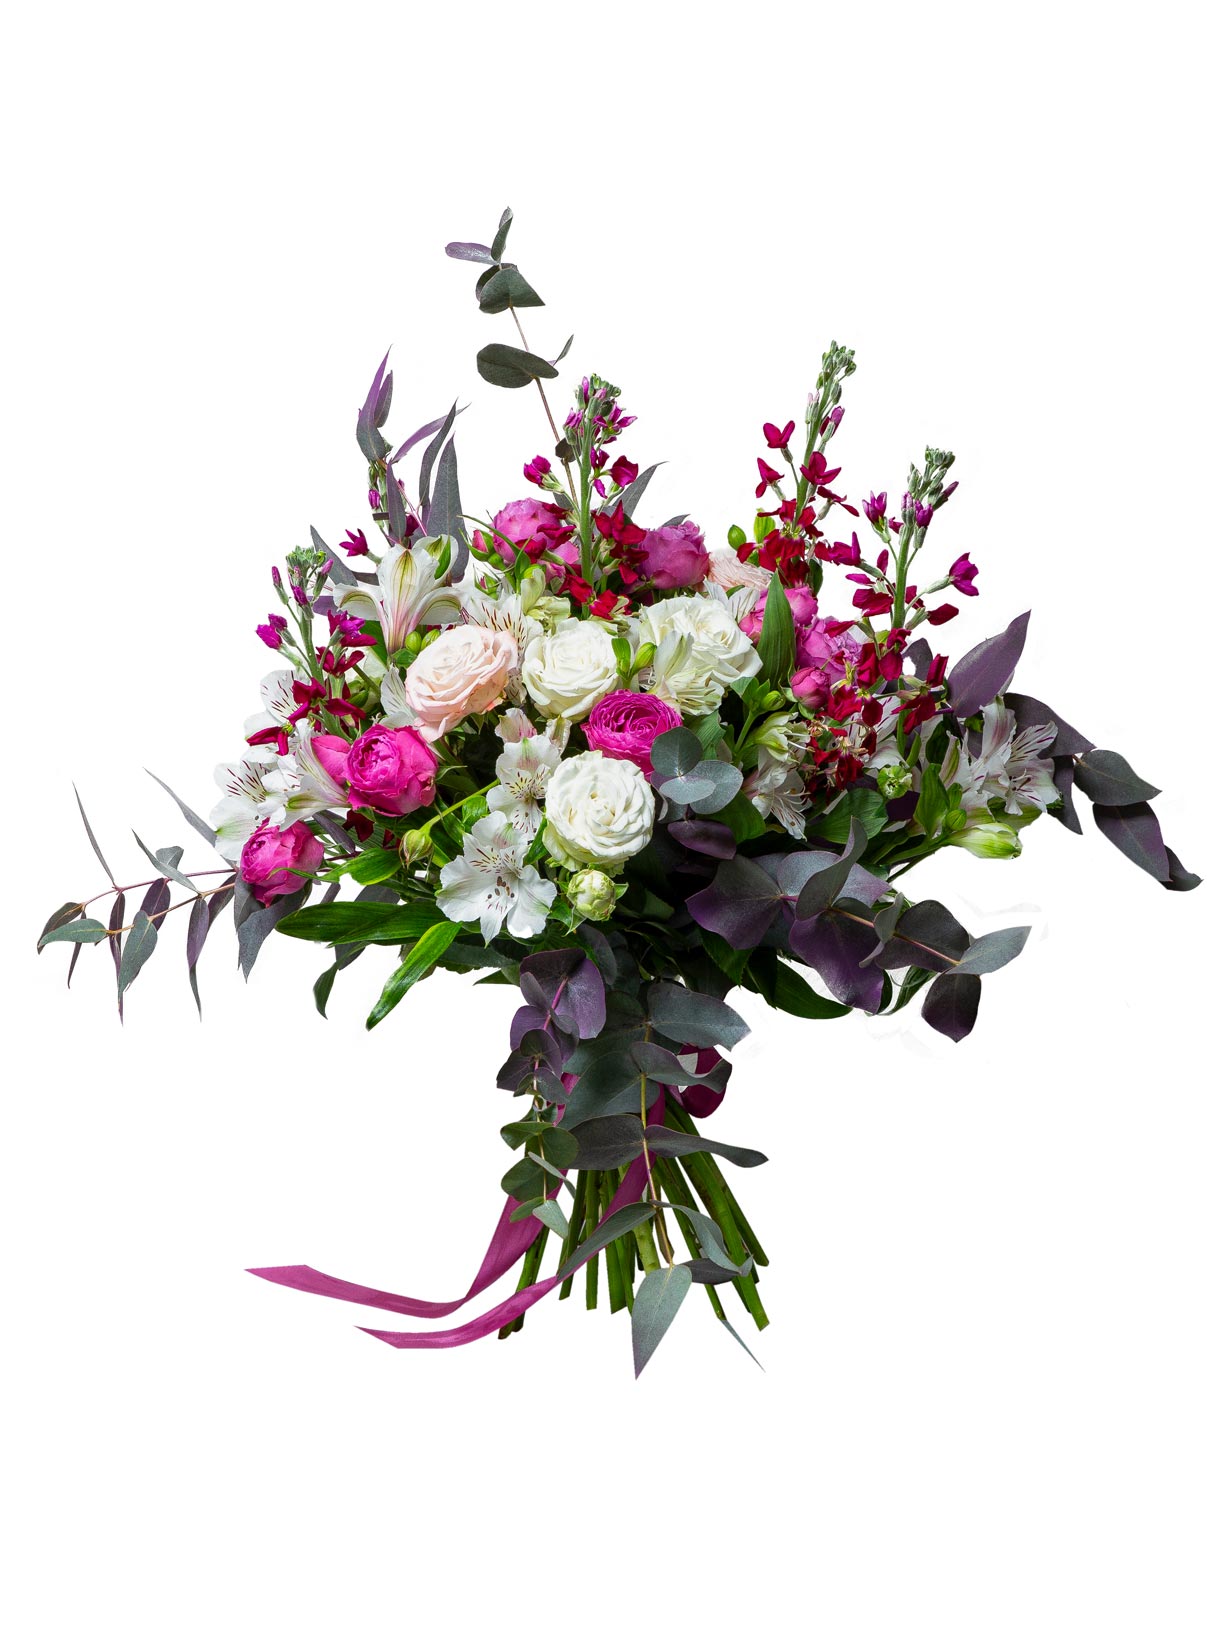 Bouquet «Tenerife» with spray roses and alstroemerias